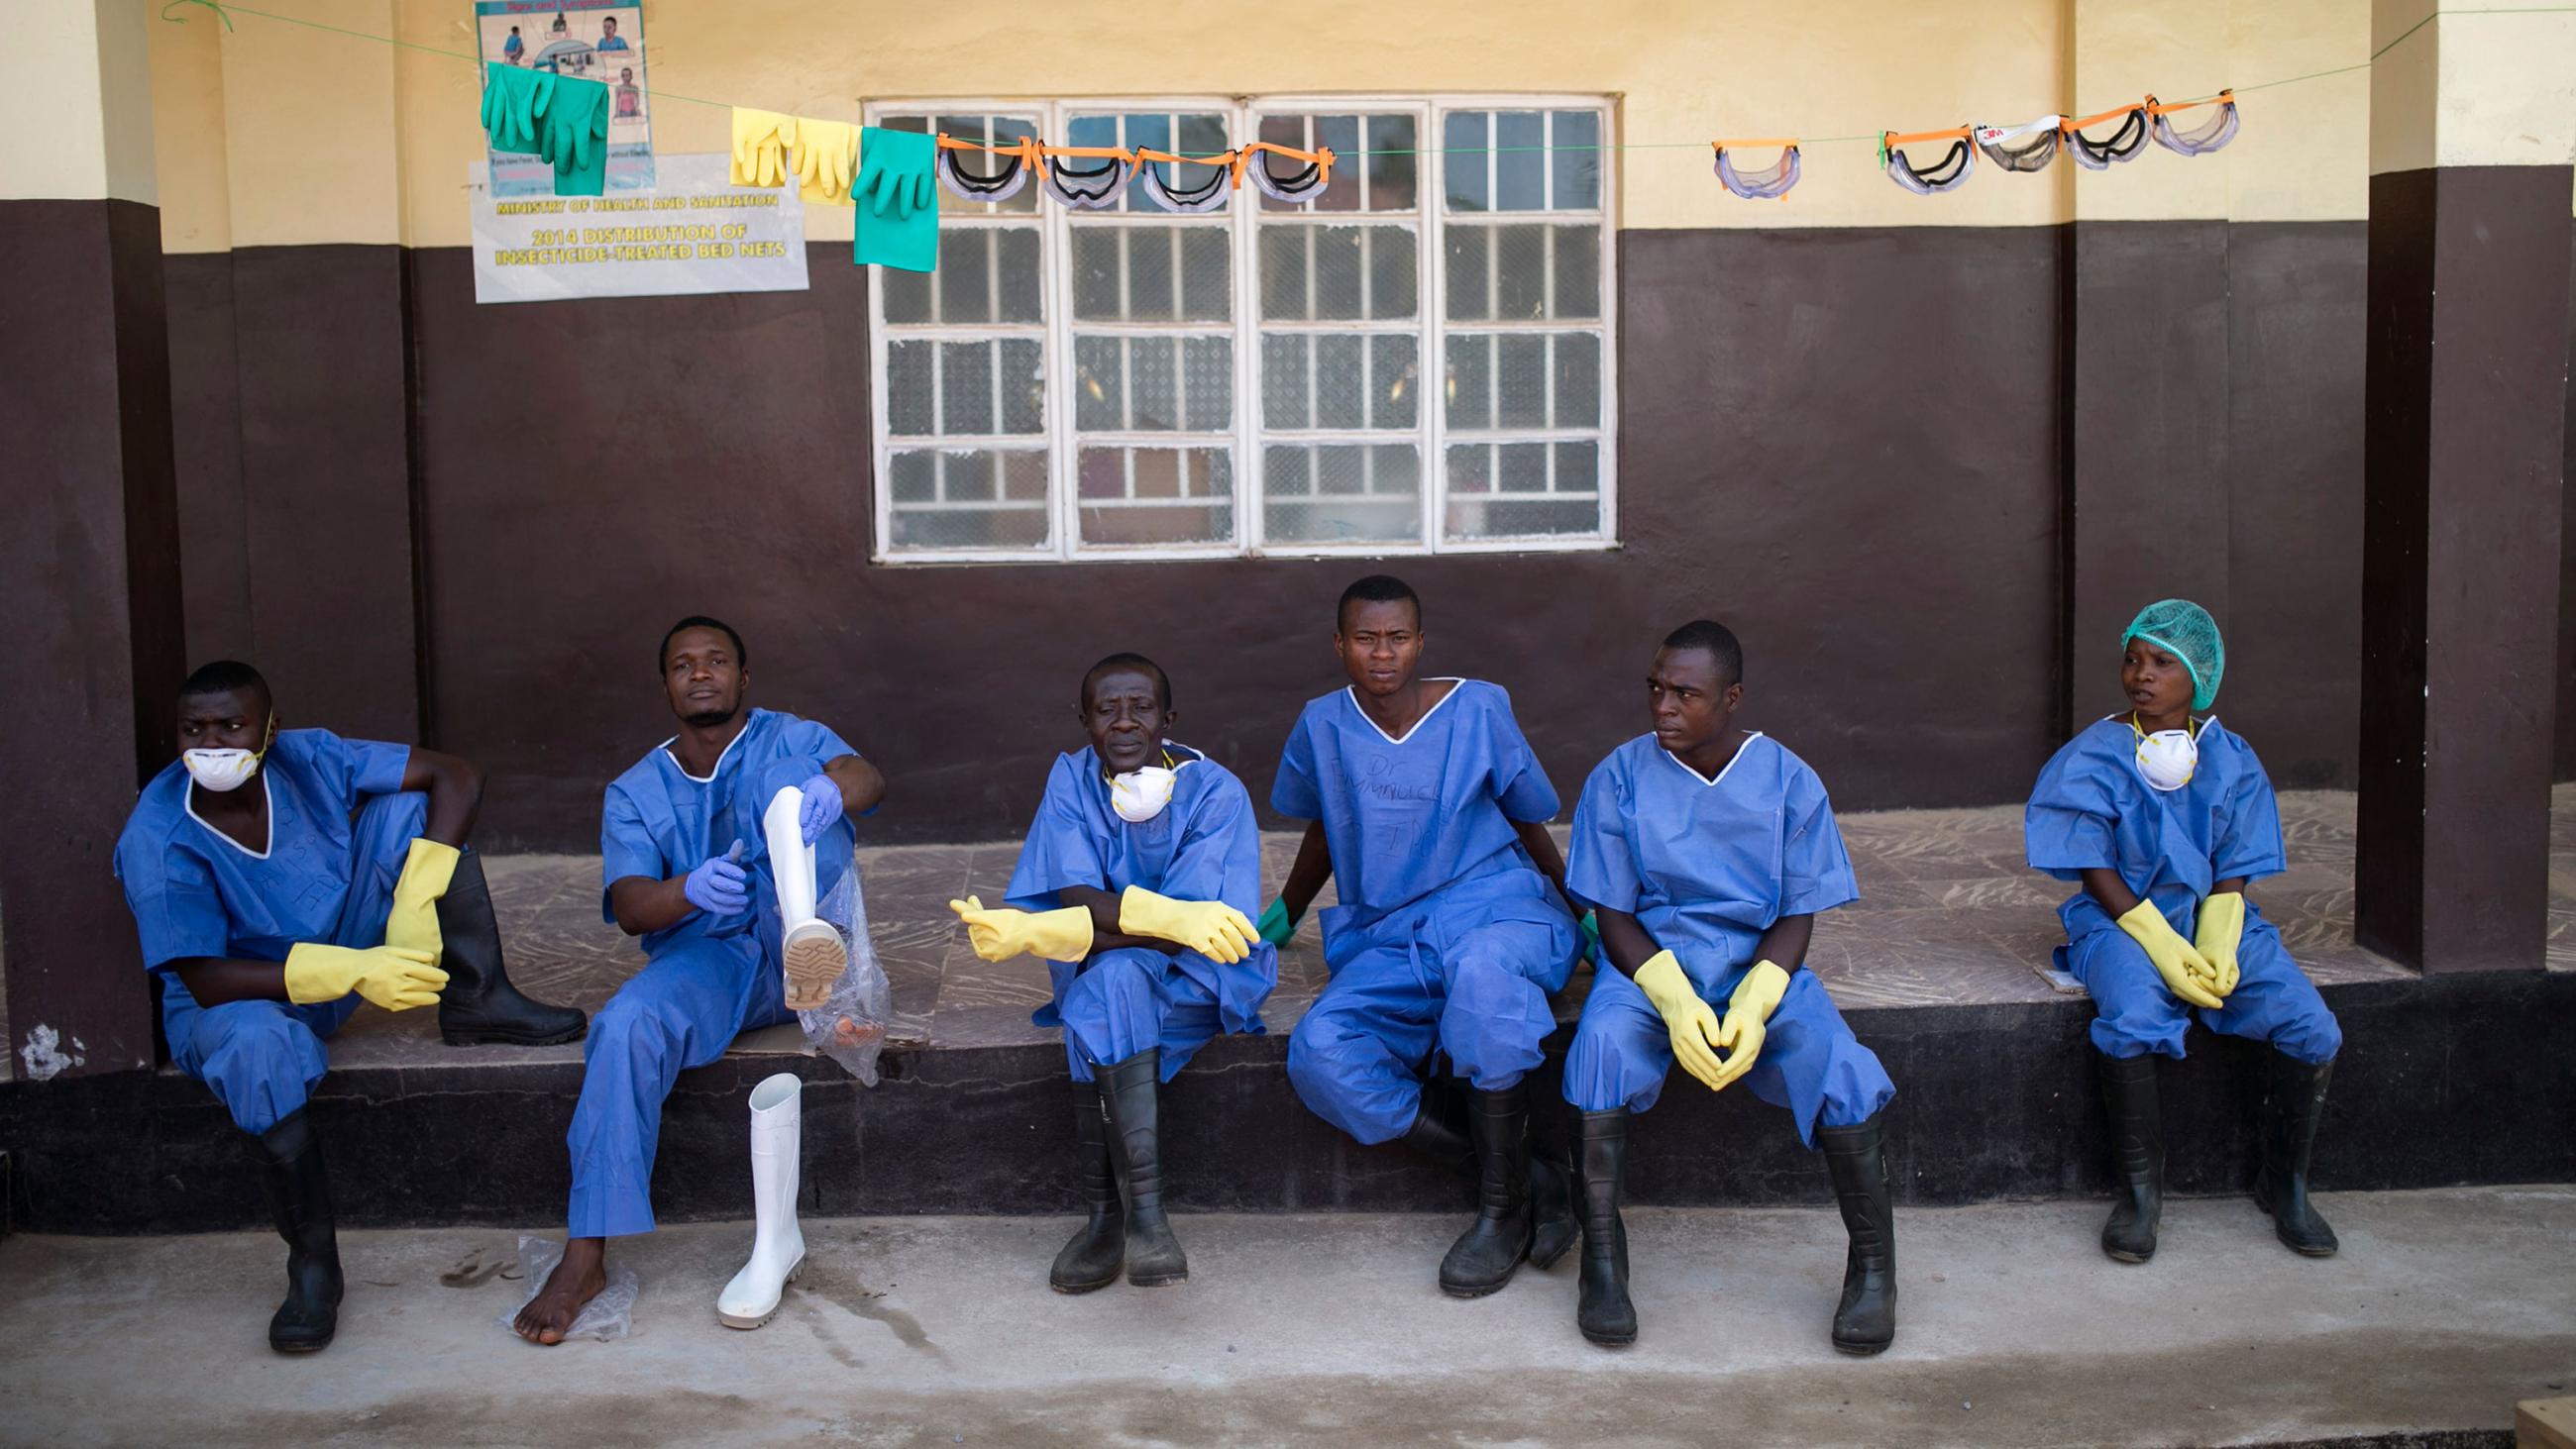 The photo shows six workers on a bench. They are wearing blue scrubs, black boots, and yellow gloves. 